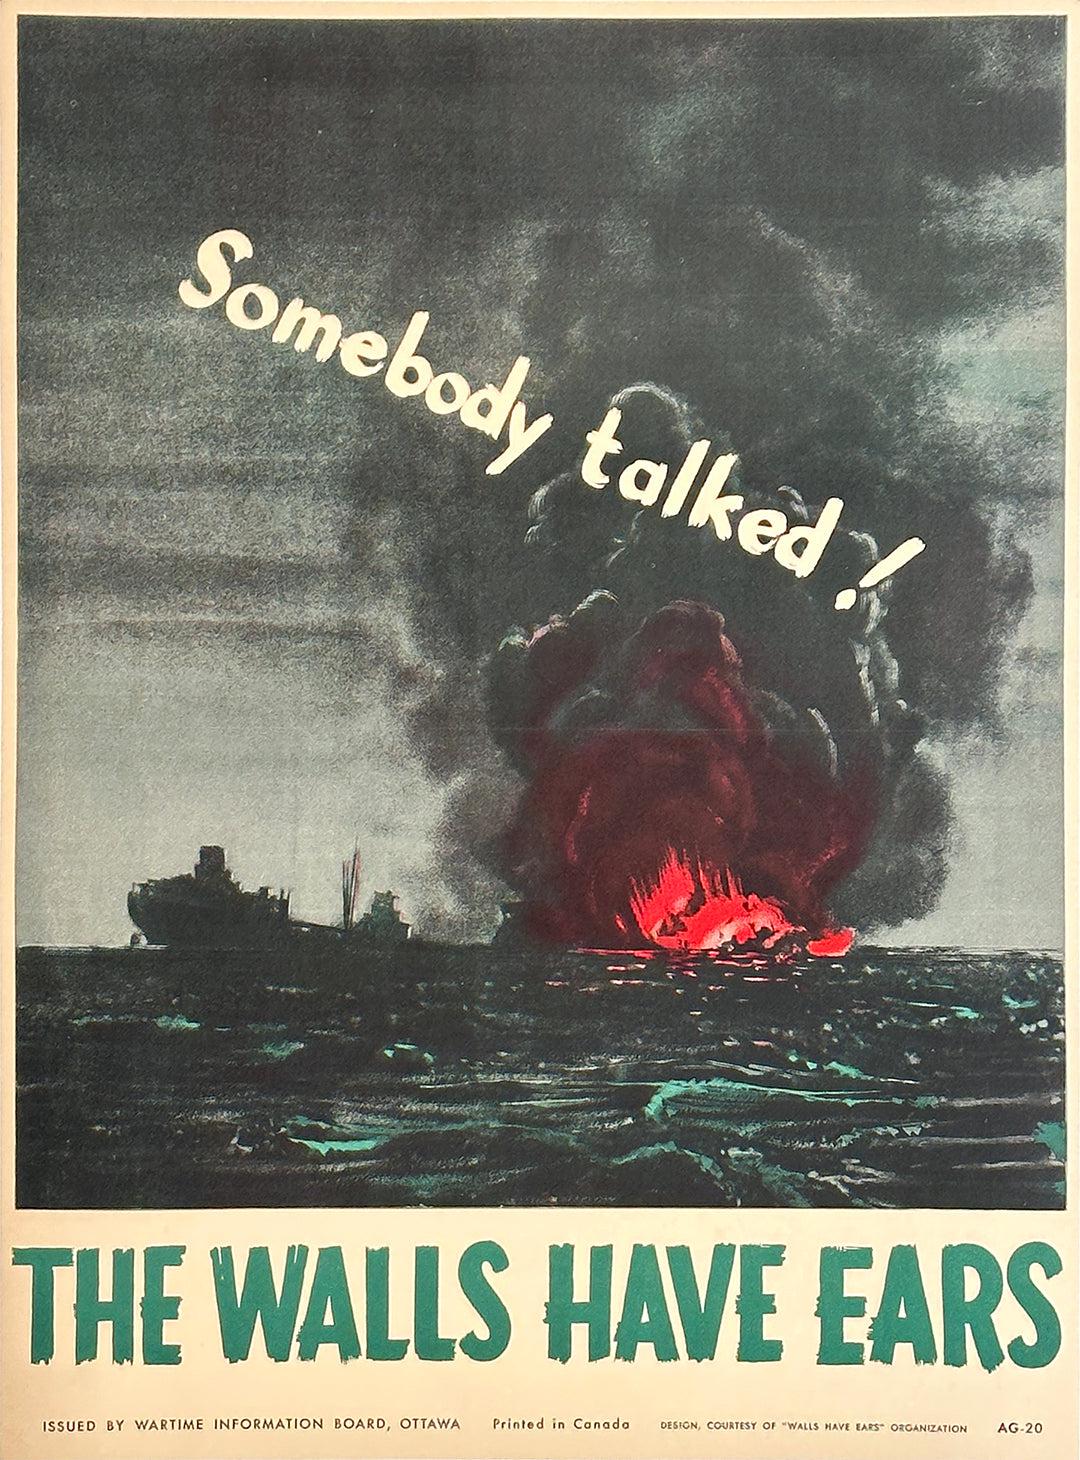 Somebody Talked - The Walls Have Ears WWII Original Vintage Canadian Poster